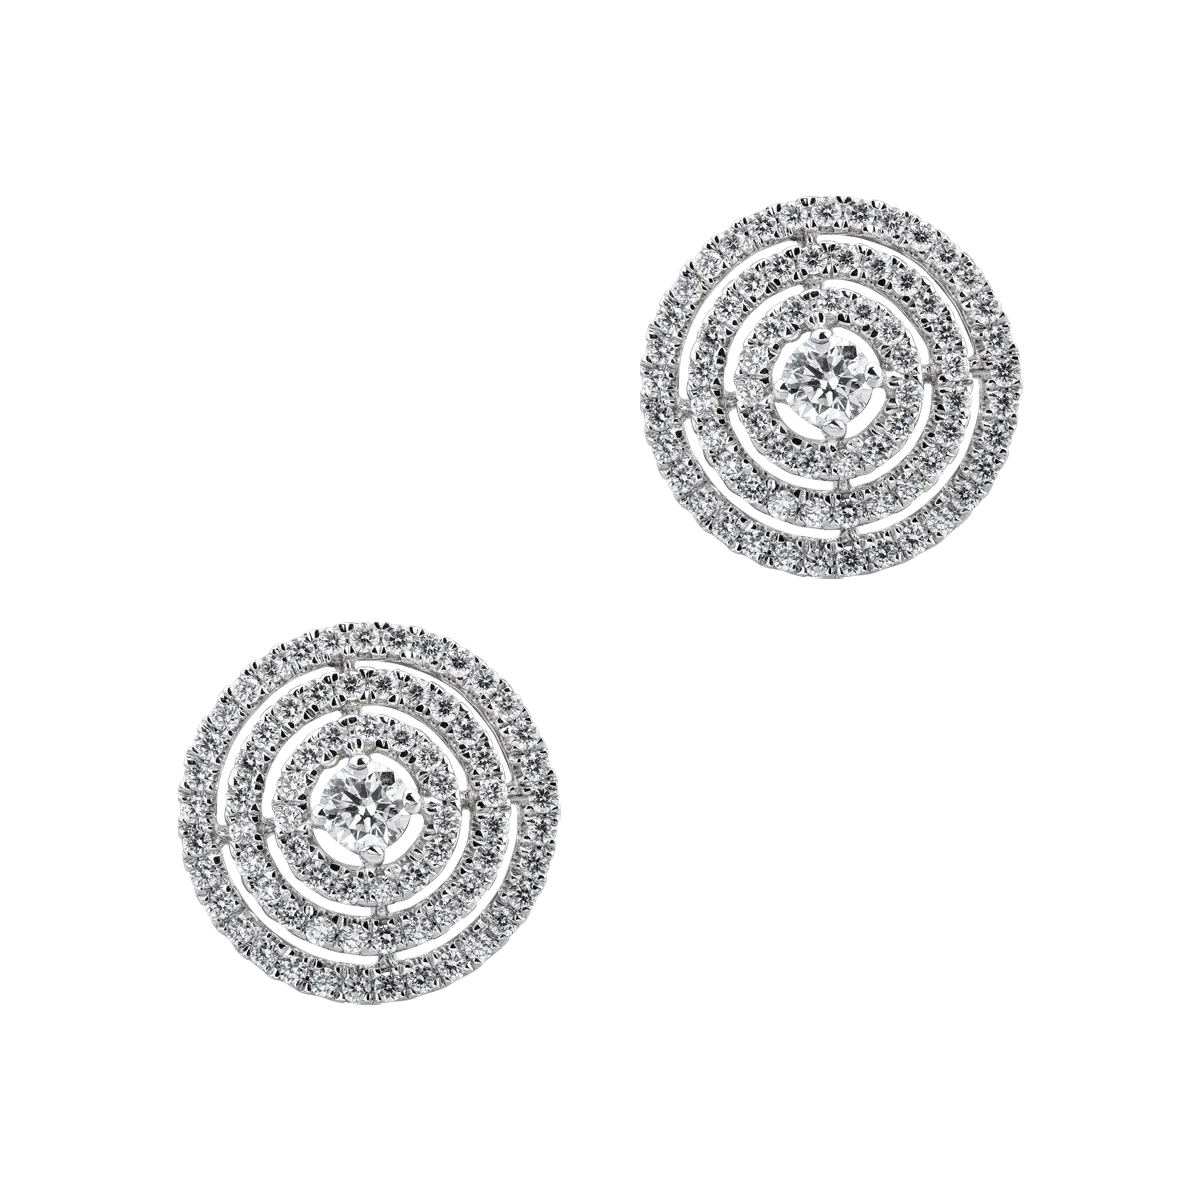 14K white gold earrings with 0.54ct diamonds